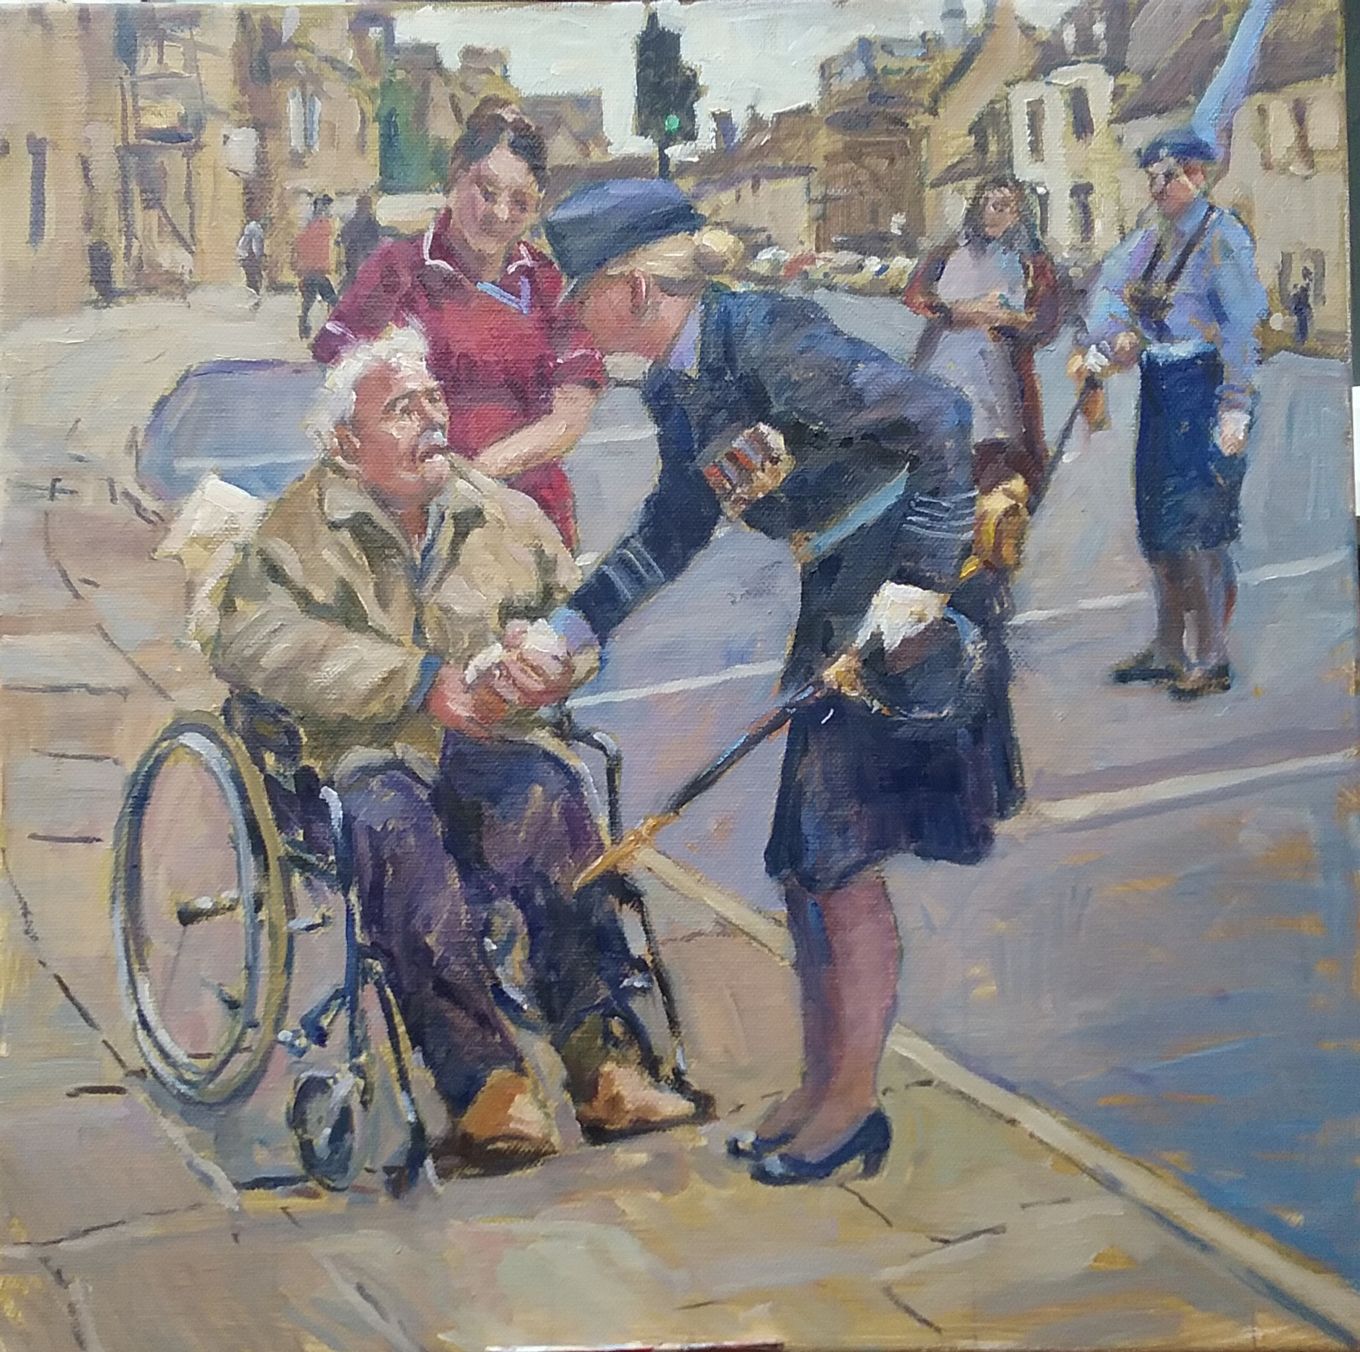 “Thank you for your service, Sir” by Stamford artist Mr Terry Preen